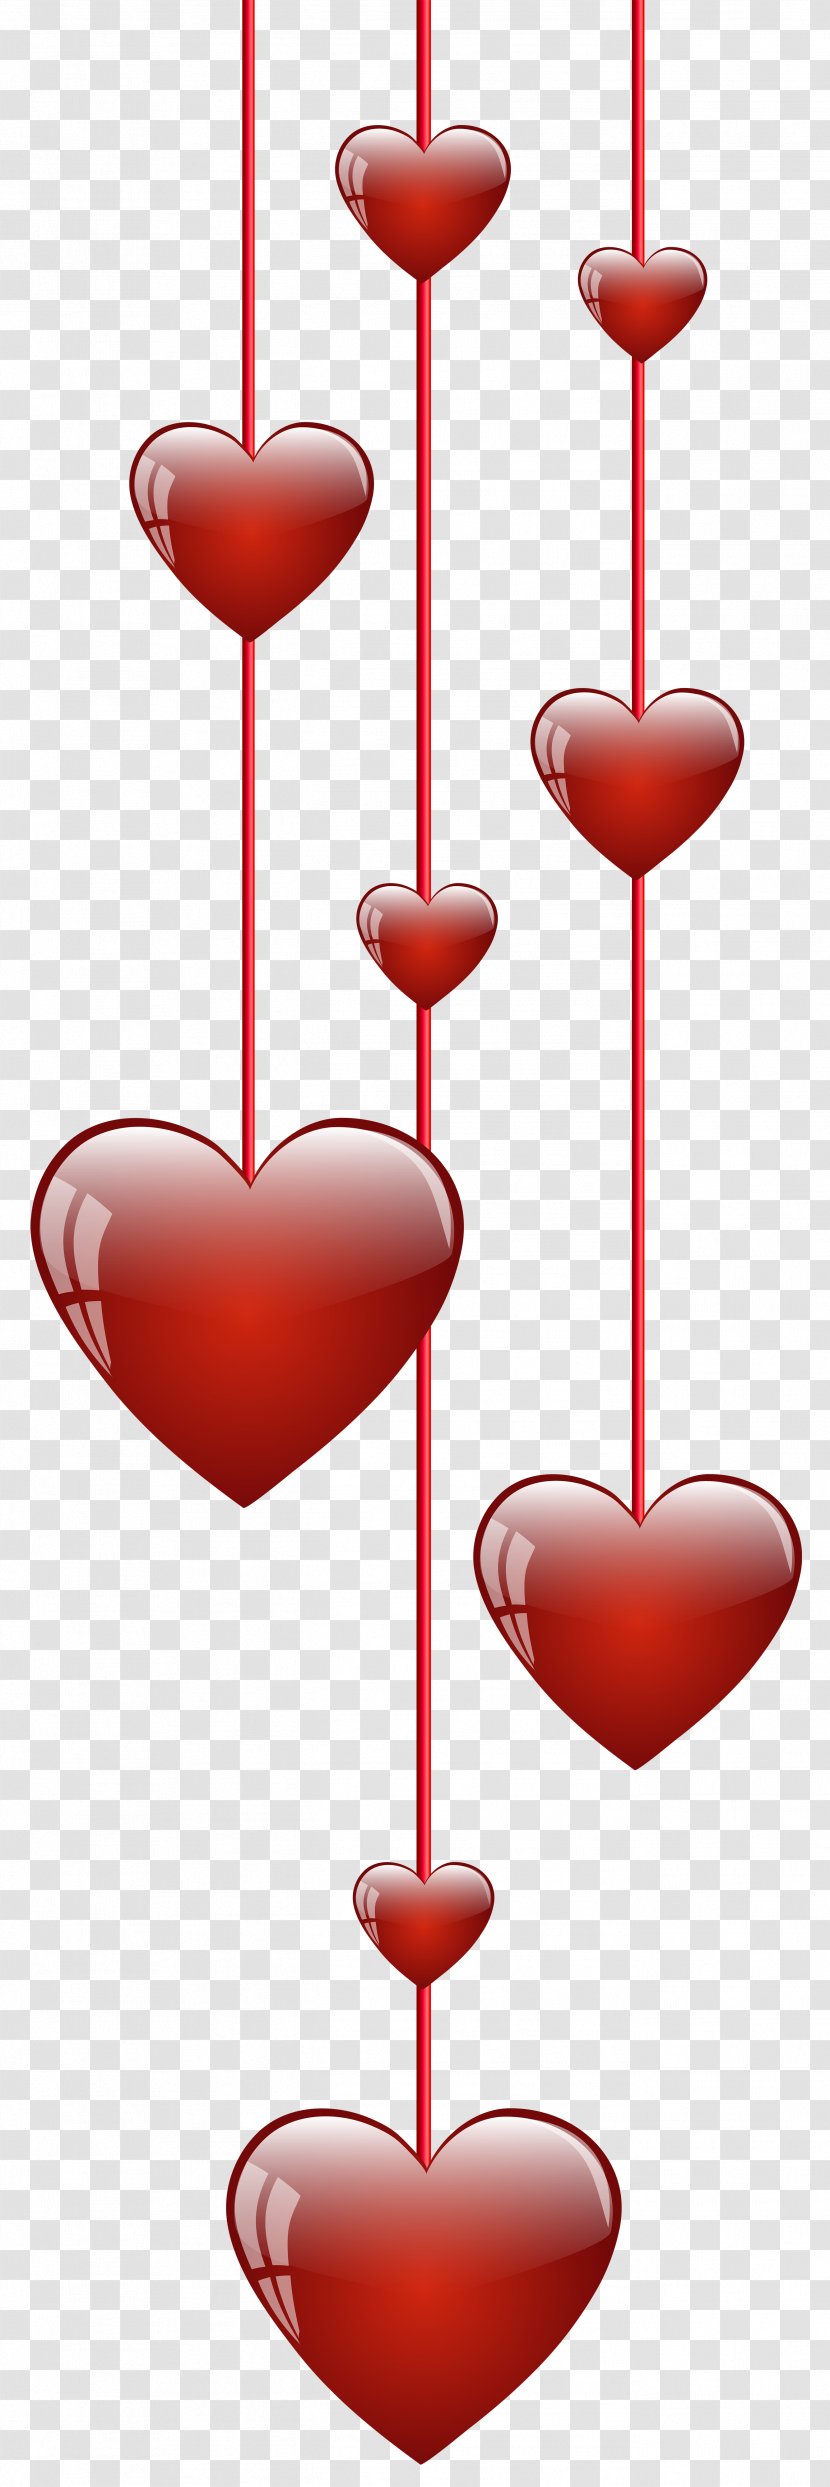 Heart - Valentine S Day Transparent PNG